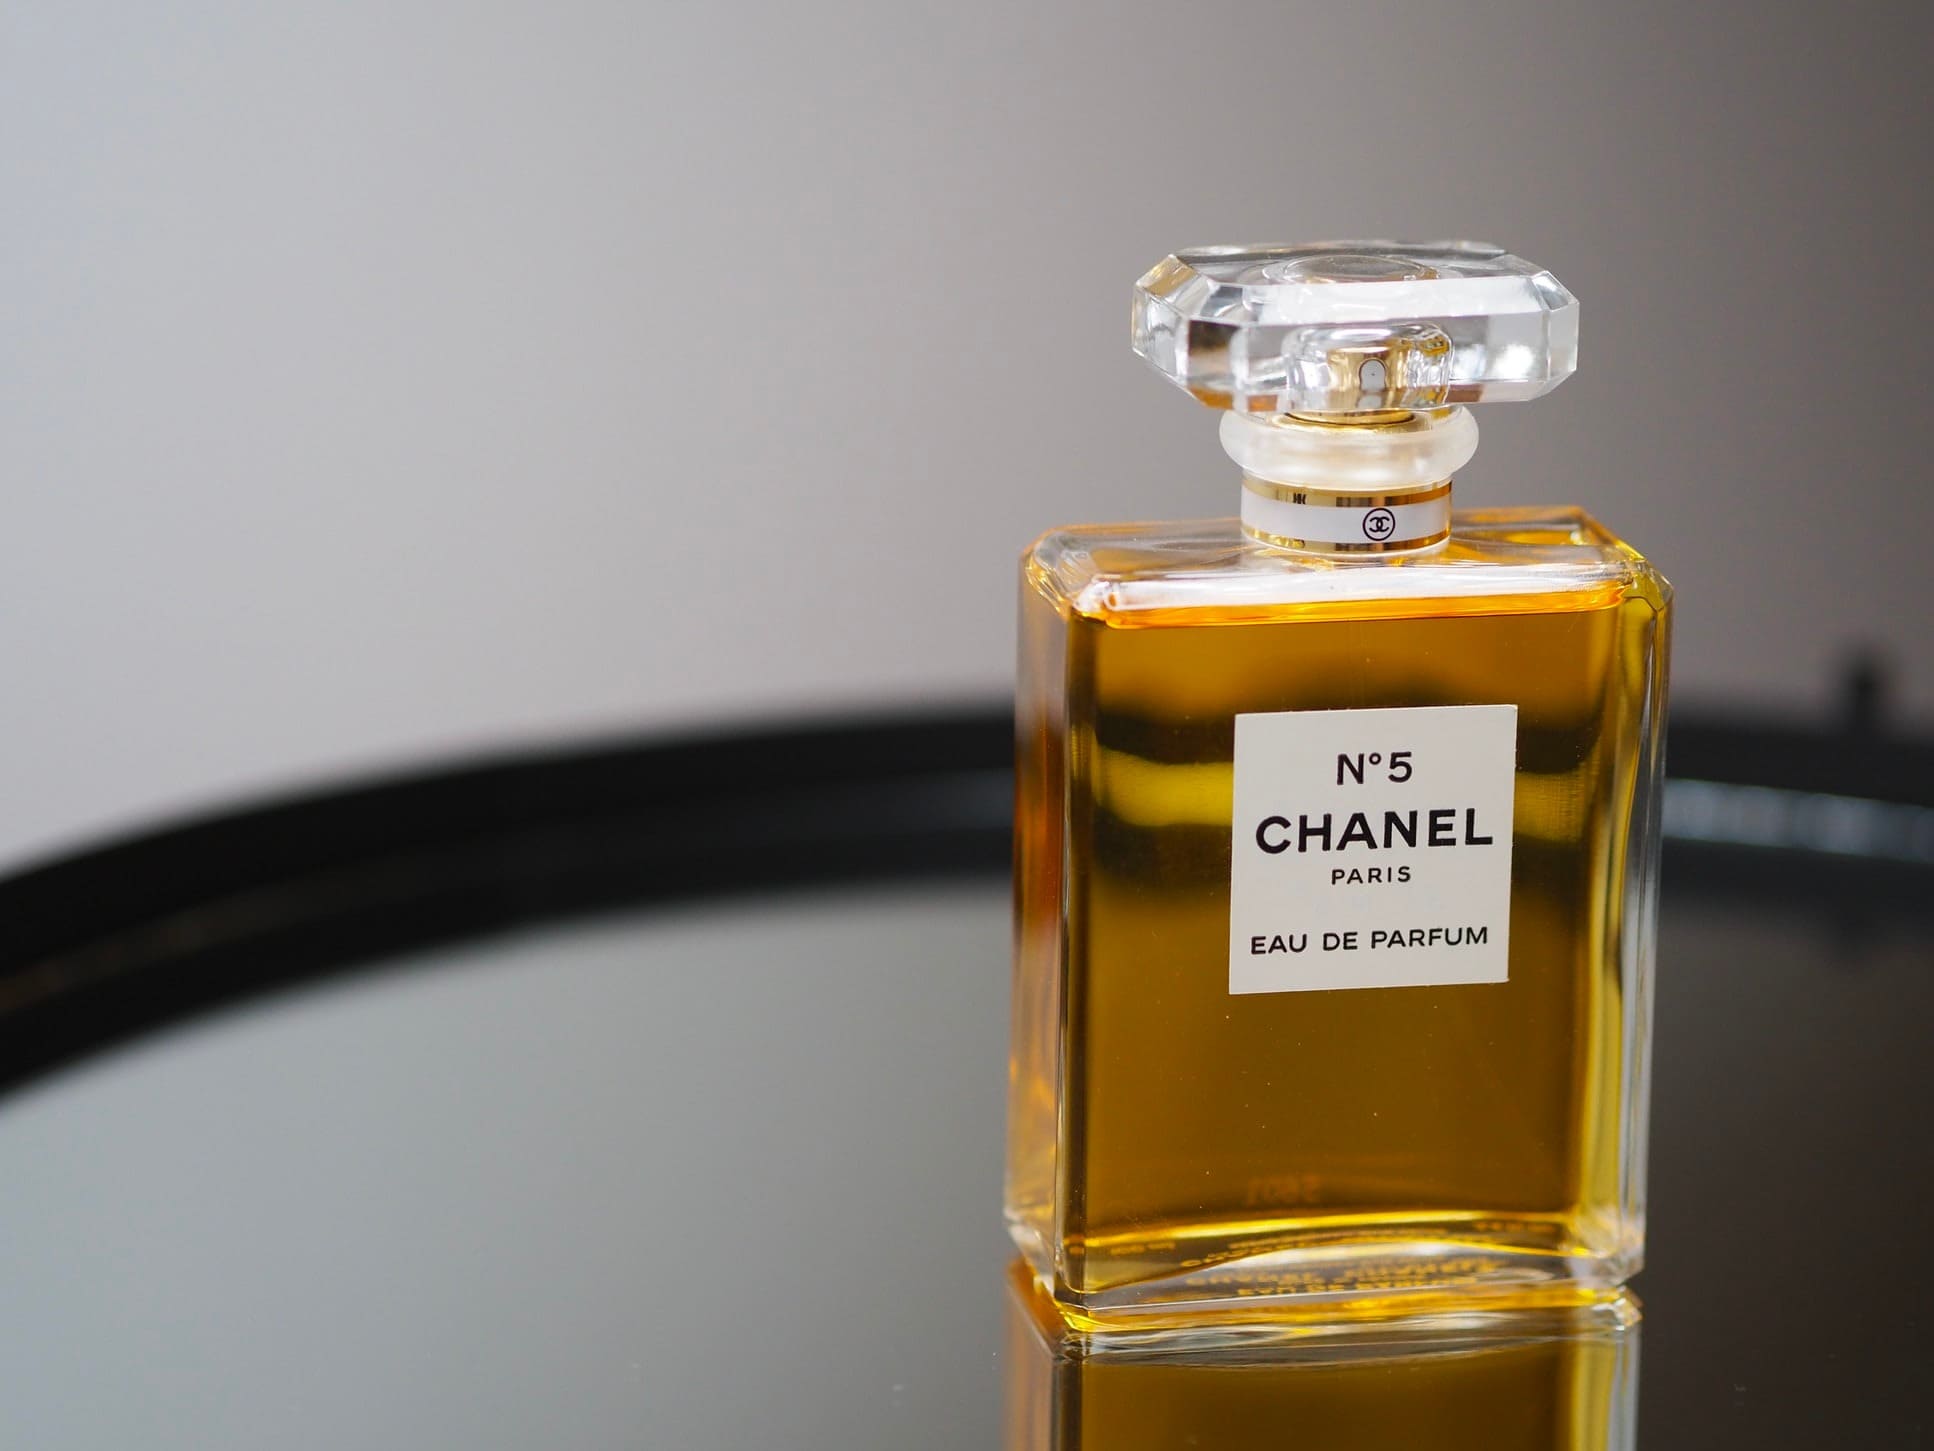 Coco Chanel  Wikipedia tiếng Việt